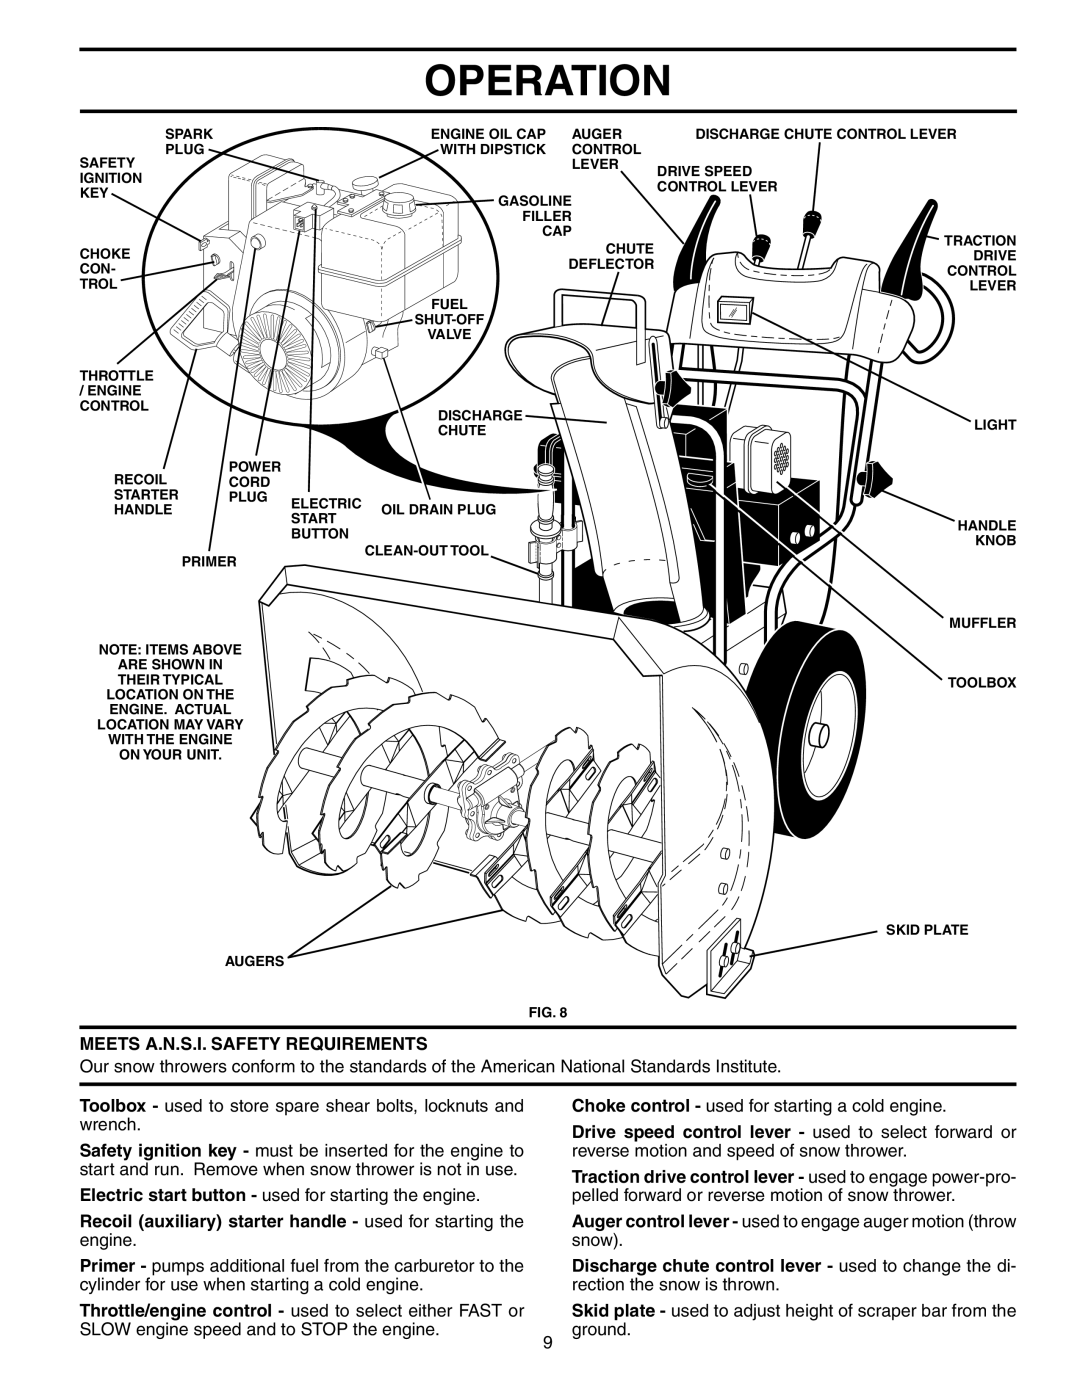 Husqvarna 8524STE owner manual Operation, Meets A.N.S.I. Safety Requirements 